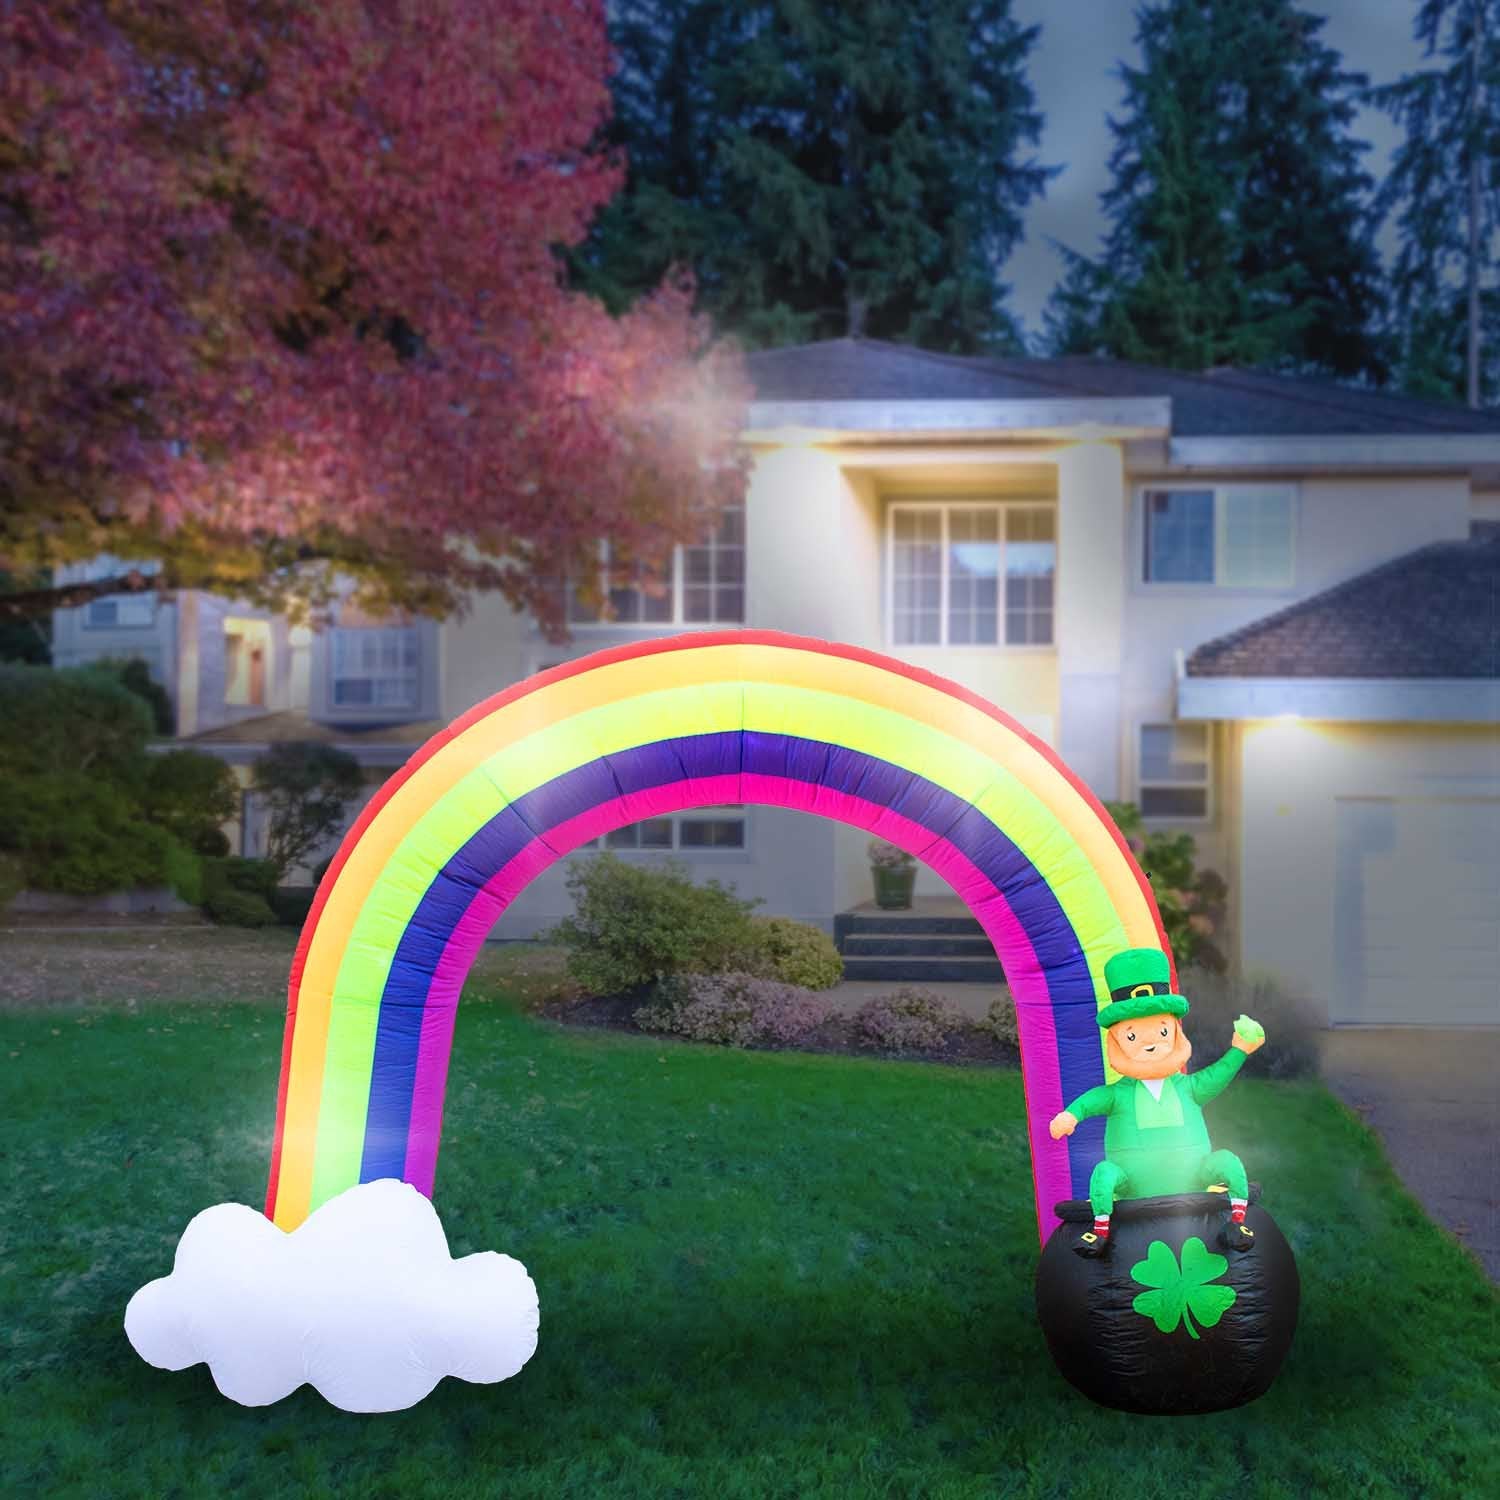 Costway 6ft St Patrick's Day Inflatable Leprechaun Irish Day Blow up  Lighted Giant Doll